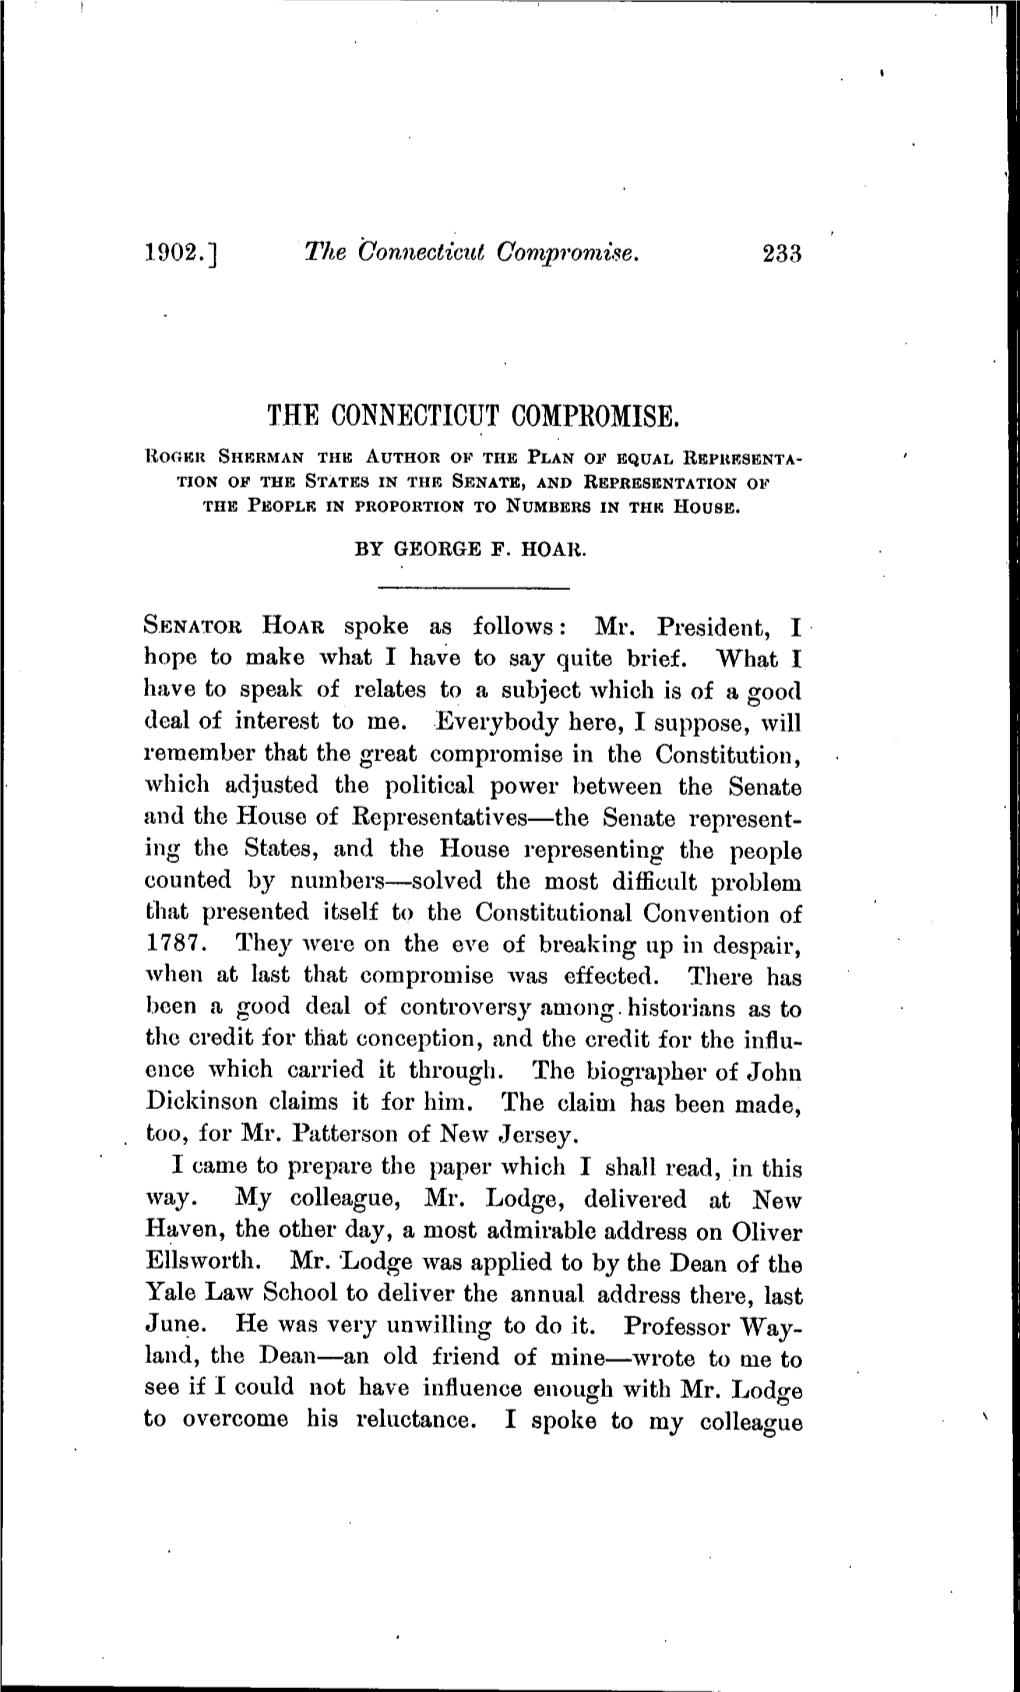 THE CONNECTICUT COMPROMISE. Kor.KK SHERMAN the AUTHOR of the PLAN of EQUAL KKPUKSENTA- TION of the STATES in the SENATE, and REPRESENTATION OF